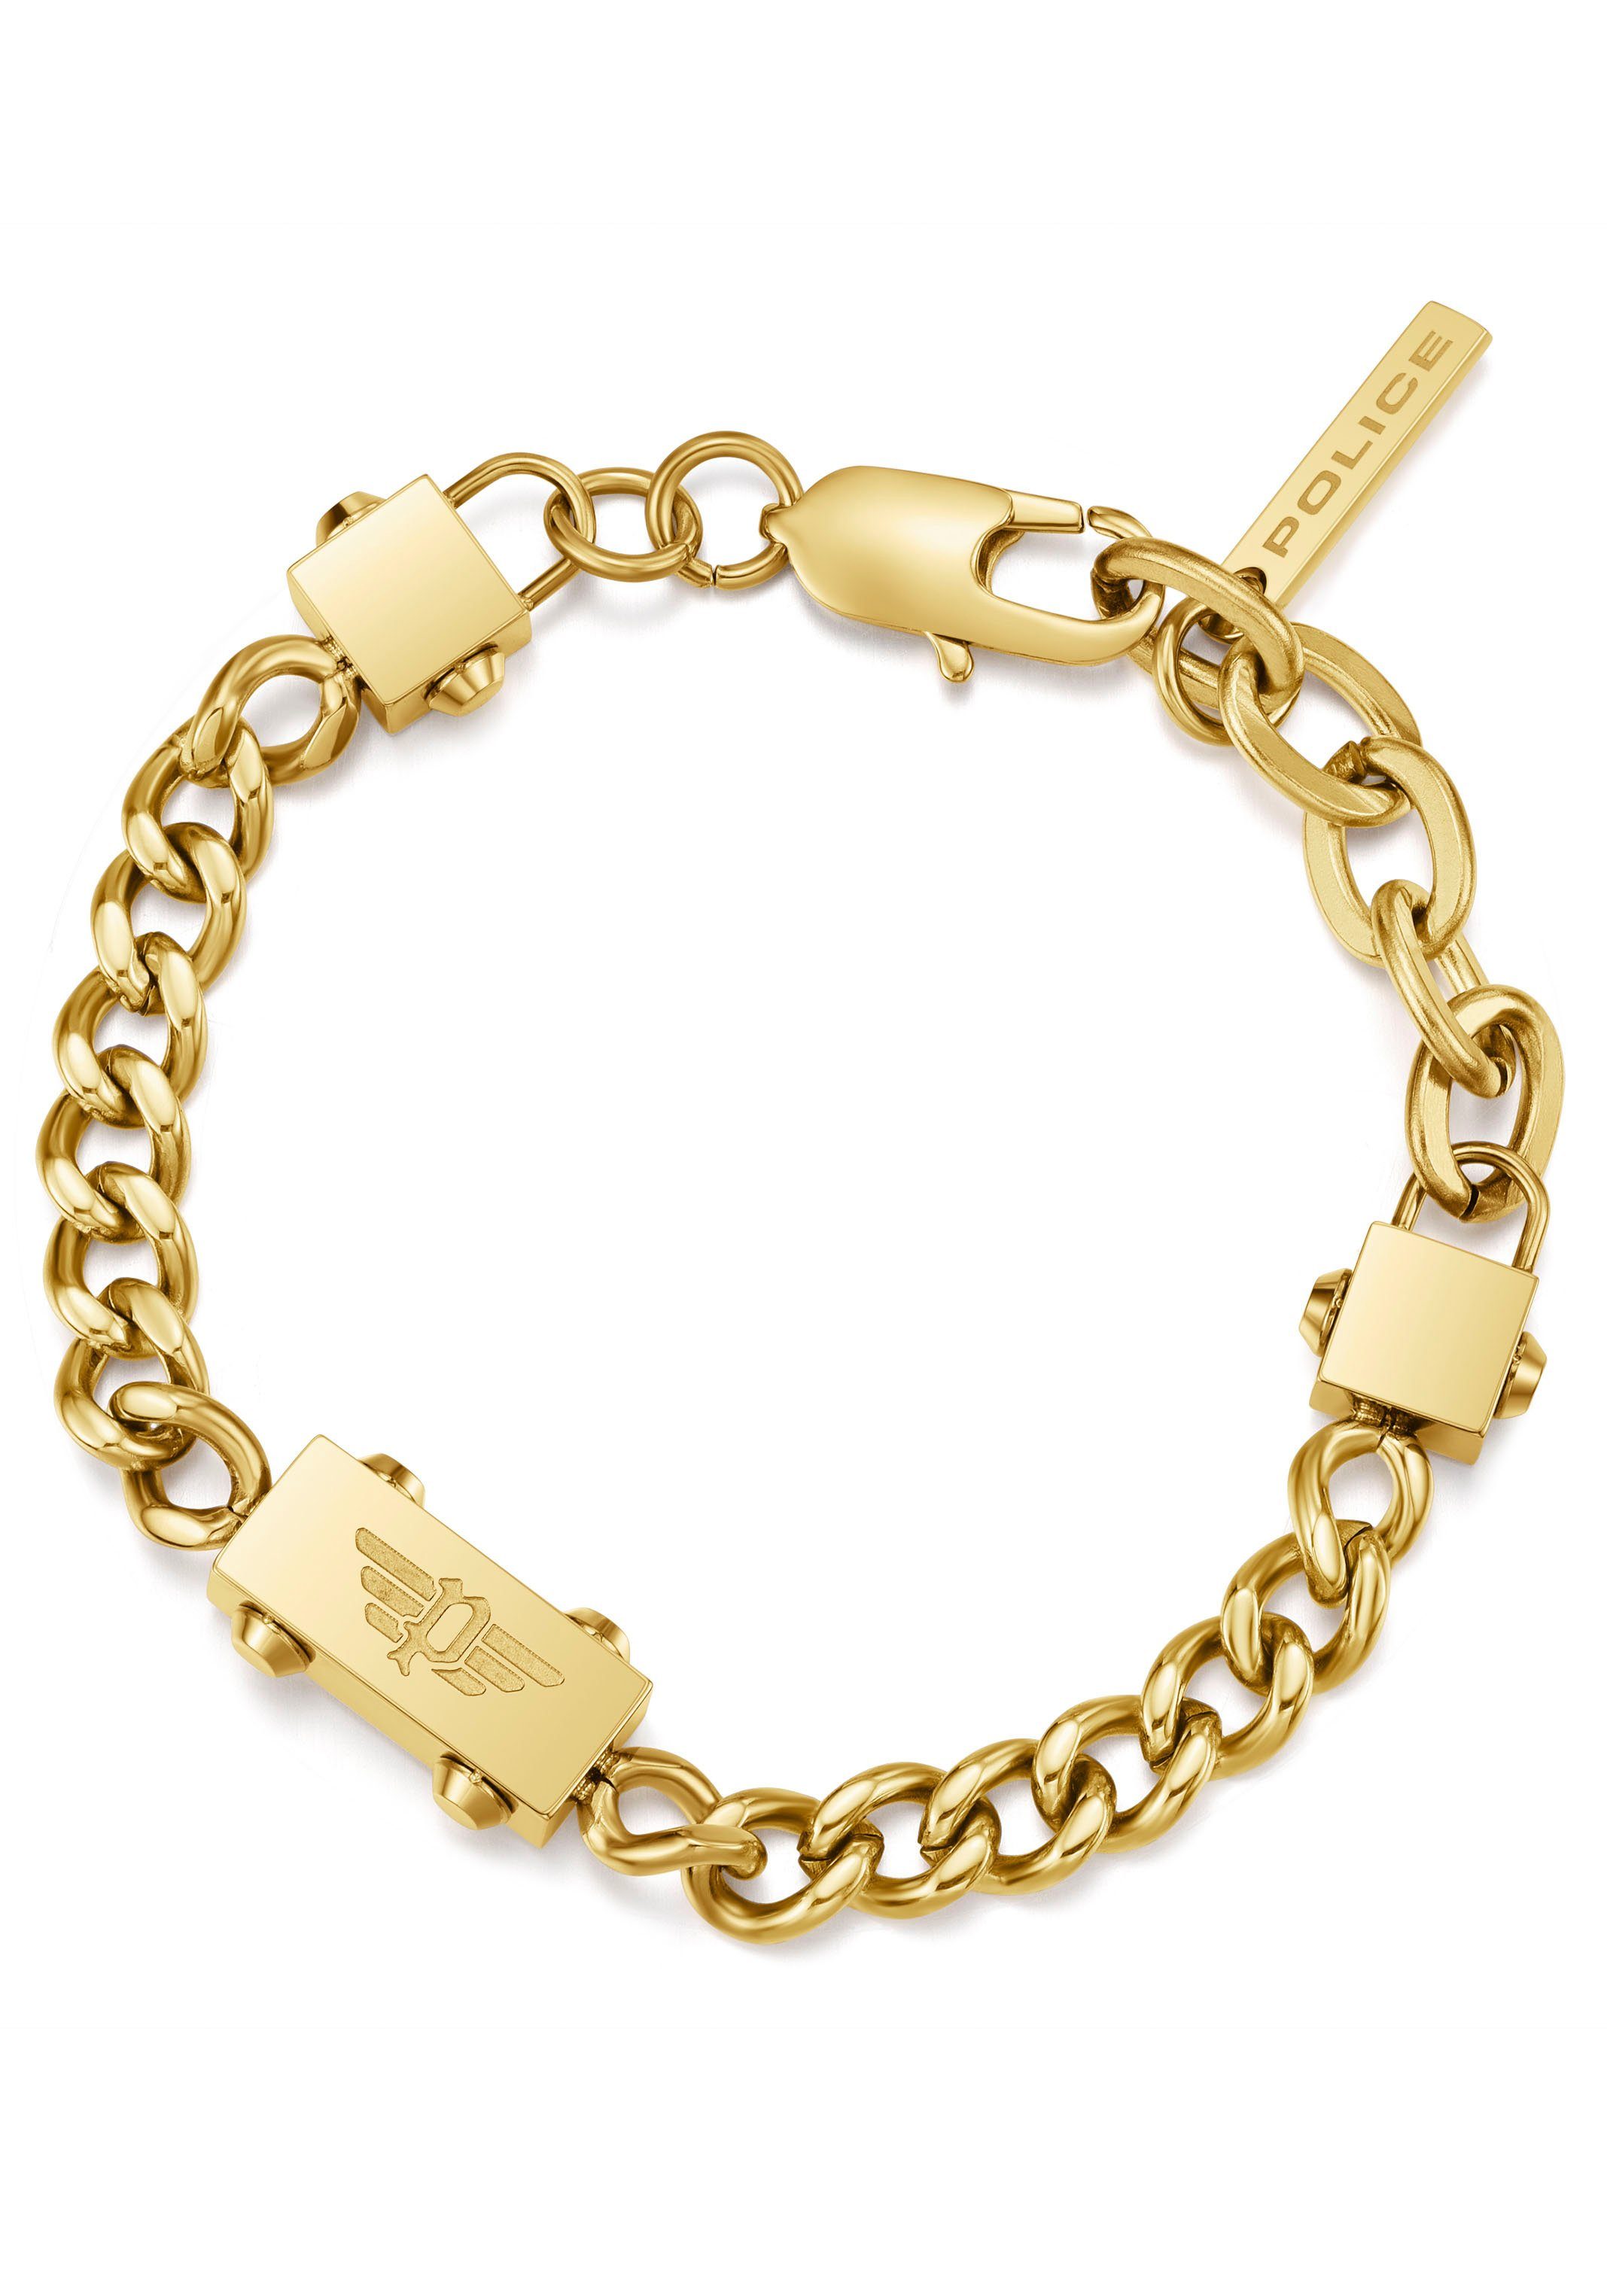 Police Armband CHAINED, PEAGB0002102, gelbgoldfarben PEAGB0002106